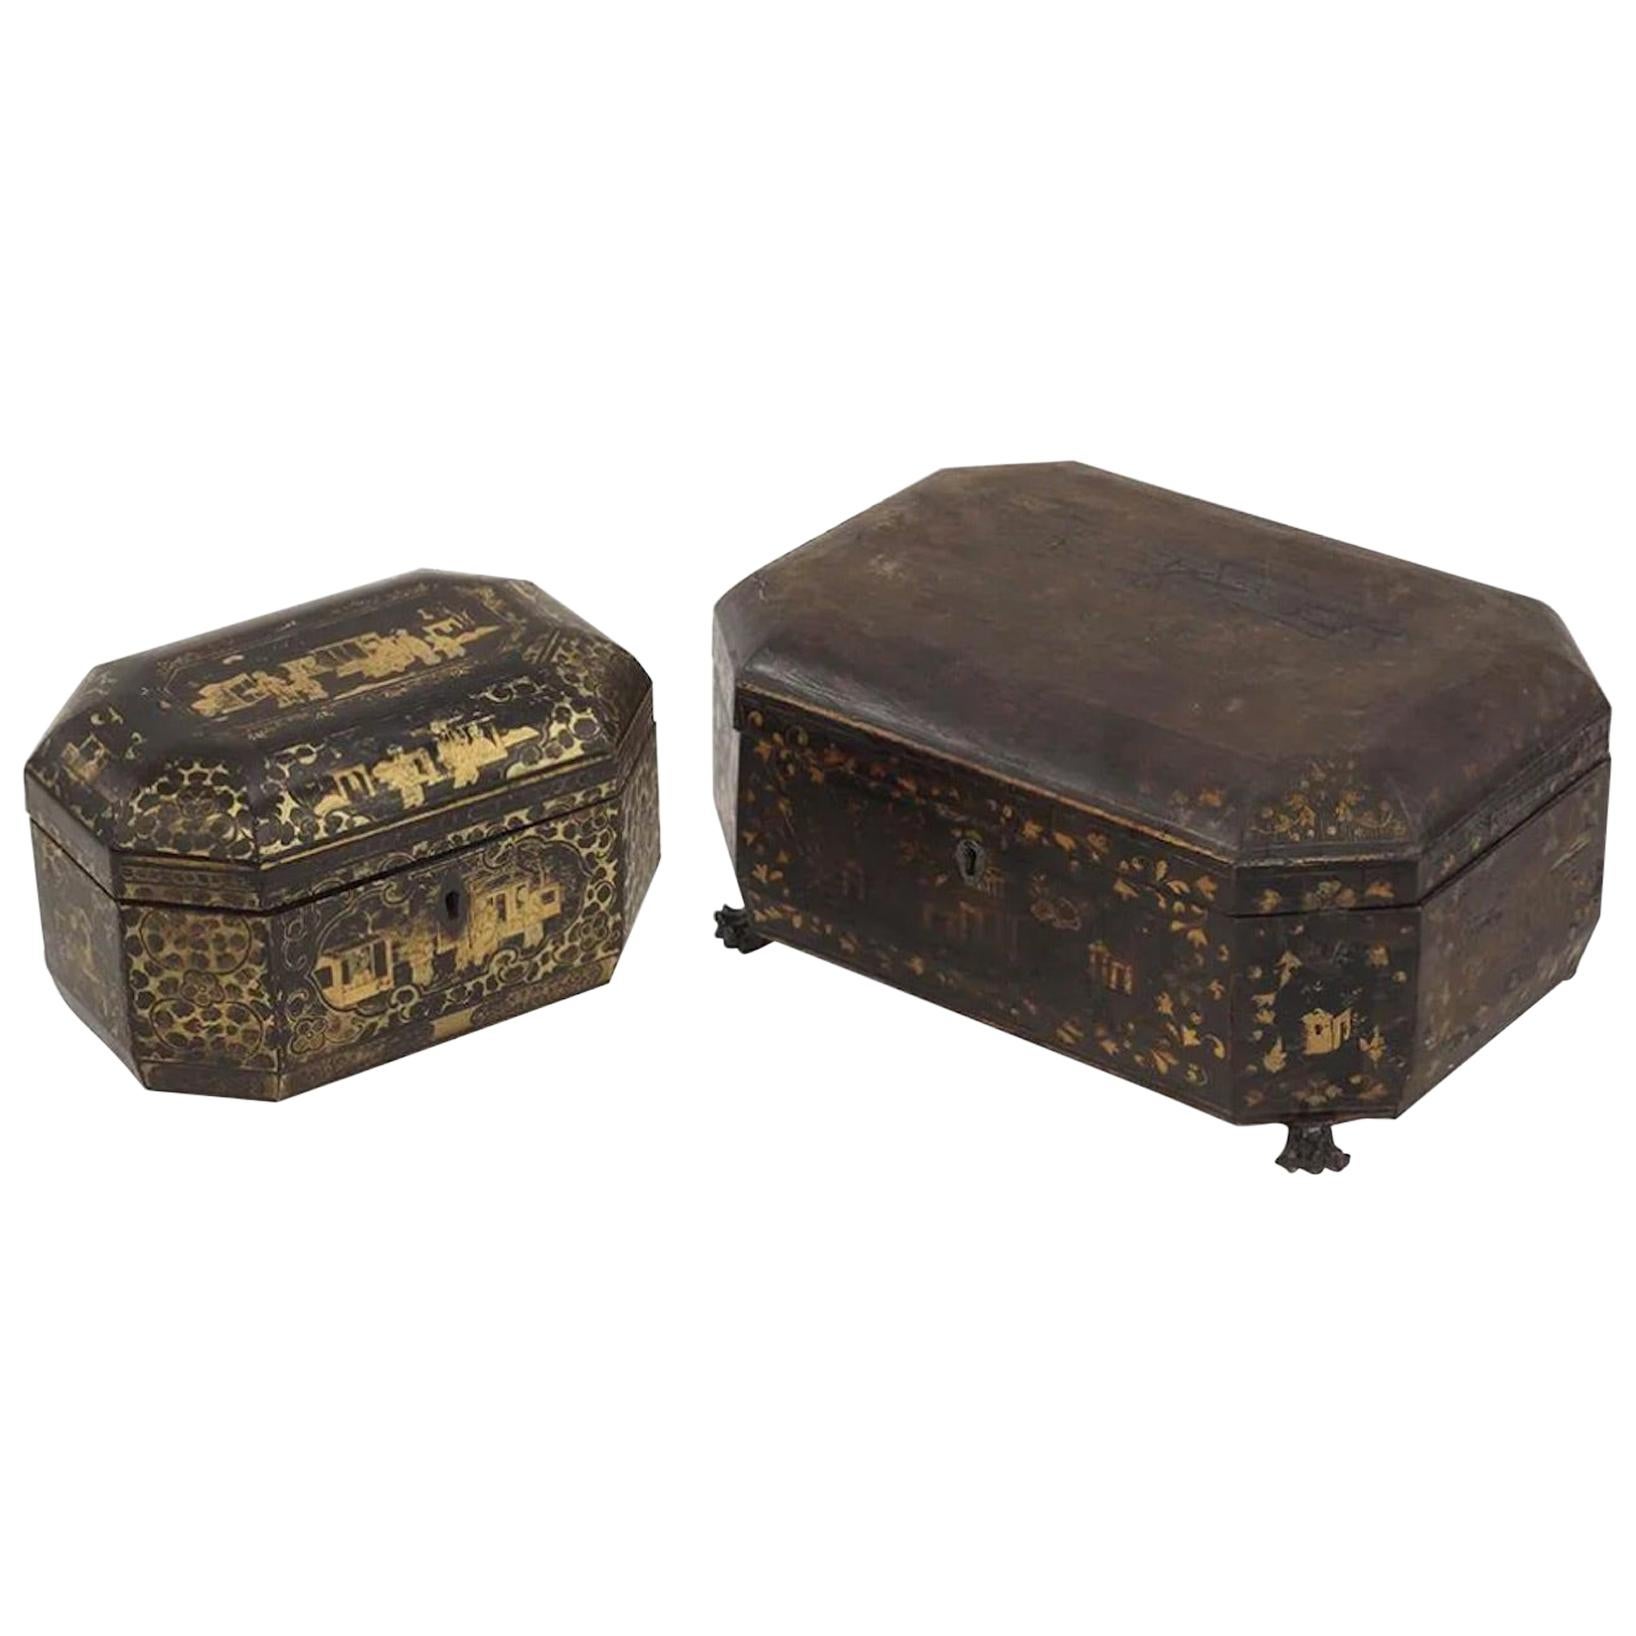 Two Chinese Export Lacquered Tea Caddy for the English Market, Priced Per Caddy